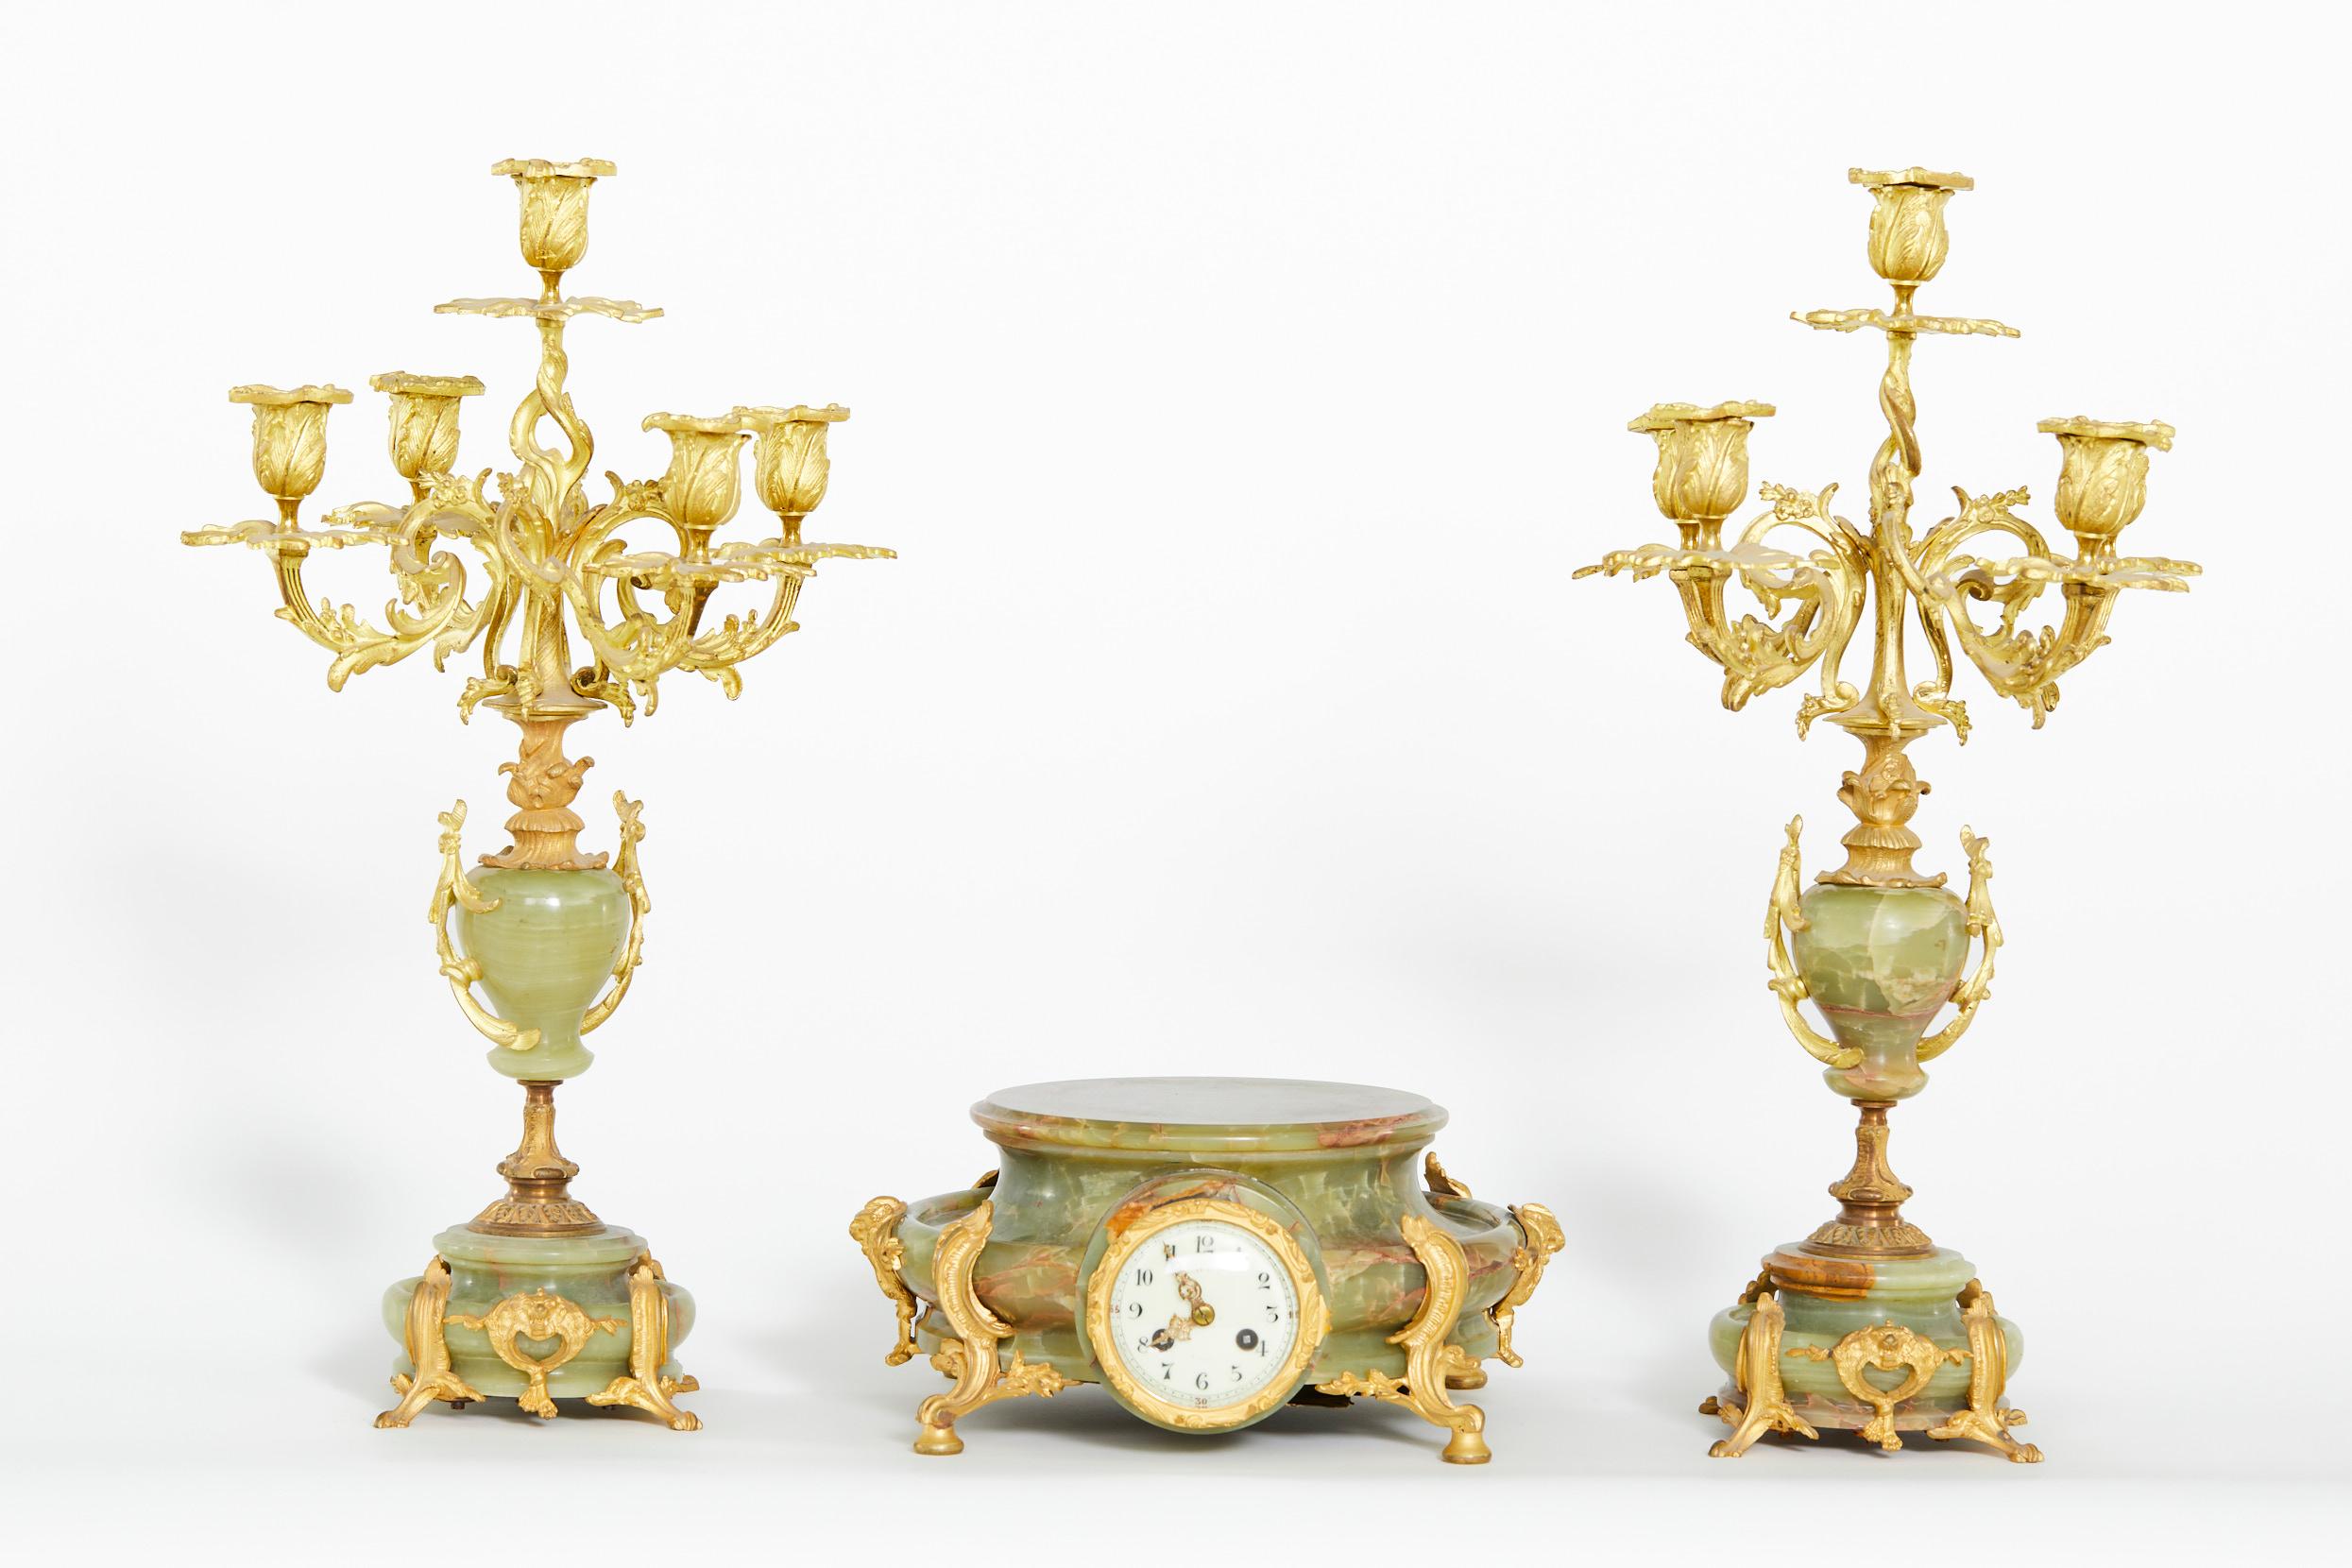 Mid 19th Century French Onyx with gilt brass and patinated metal three piece clock garniture set . The clock features an 8 day brass design time and strike movement striking on a bell . The clock is in good antique condition . Minor wear consistent